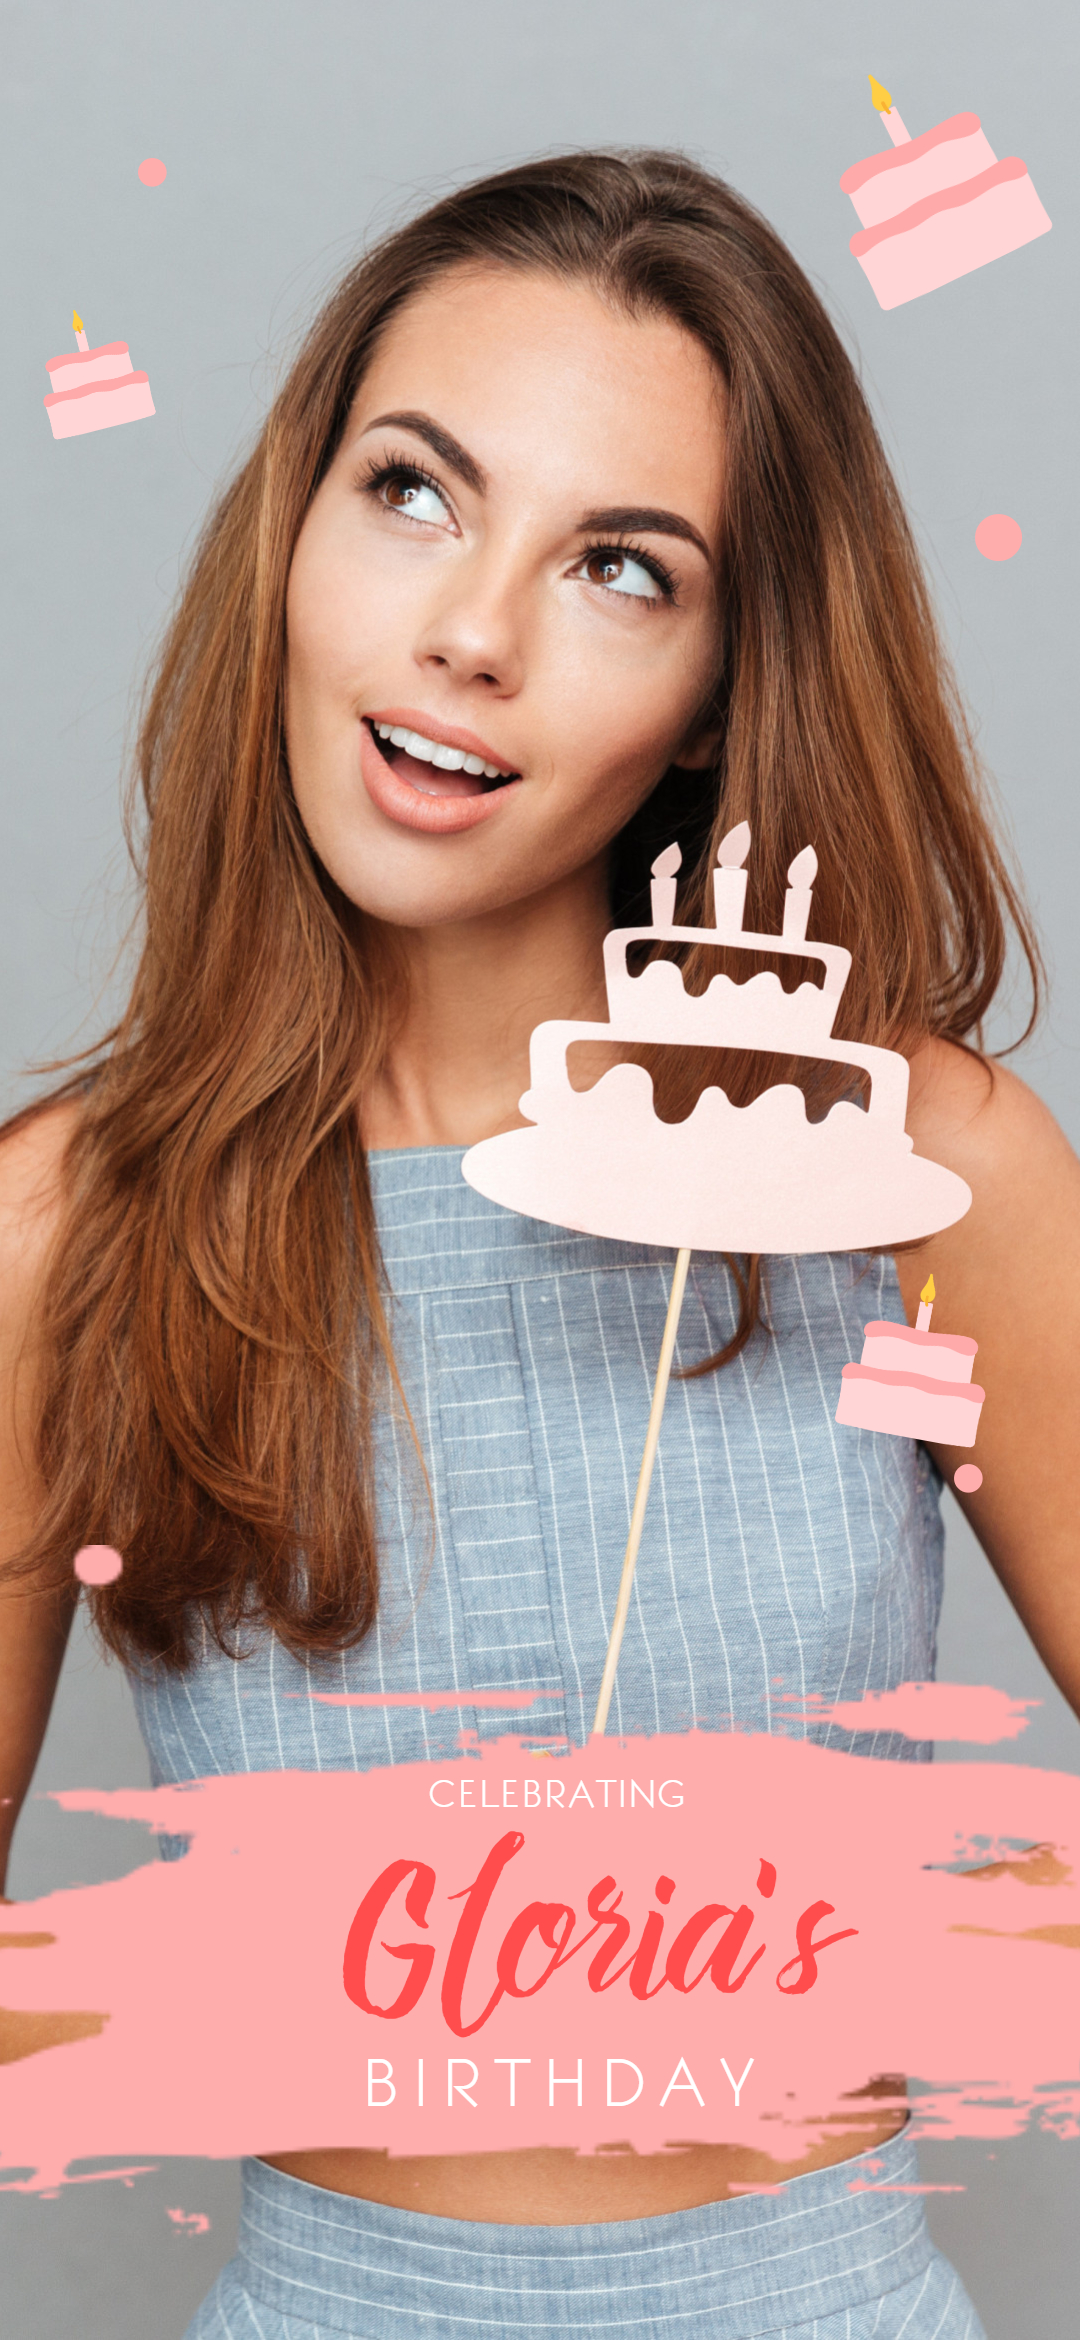 Copy of Pink Birthday Snapchat Filter - Made with PosterMyWall.jpg